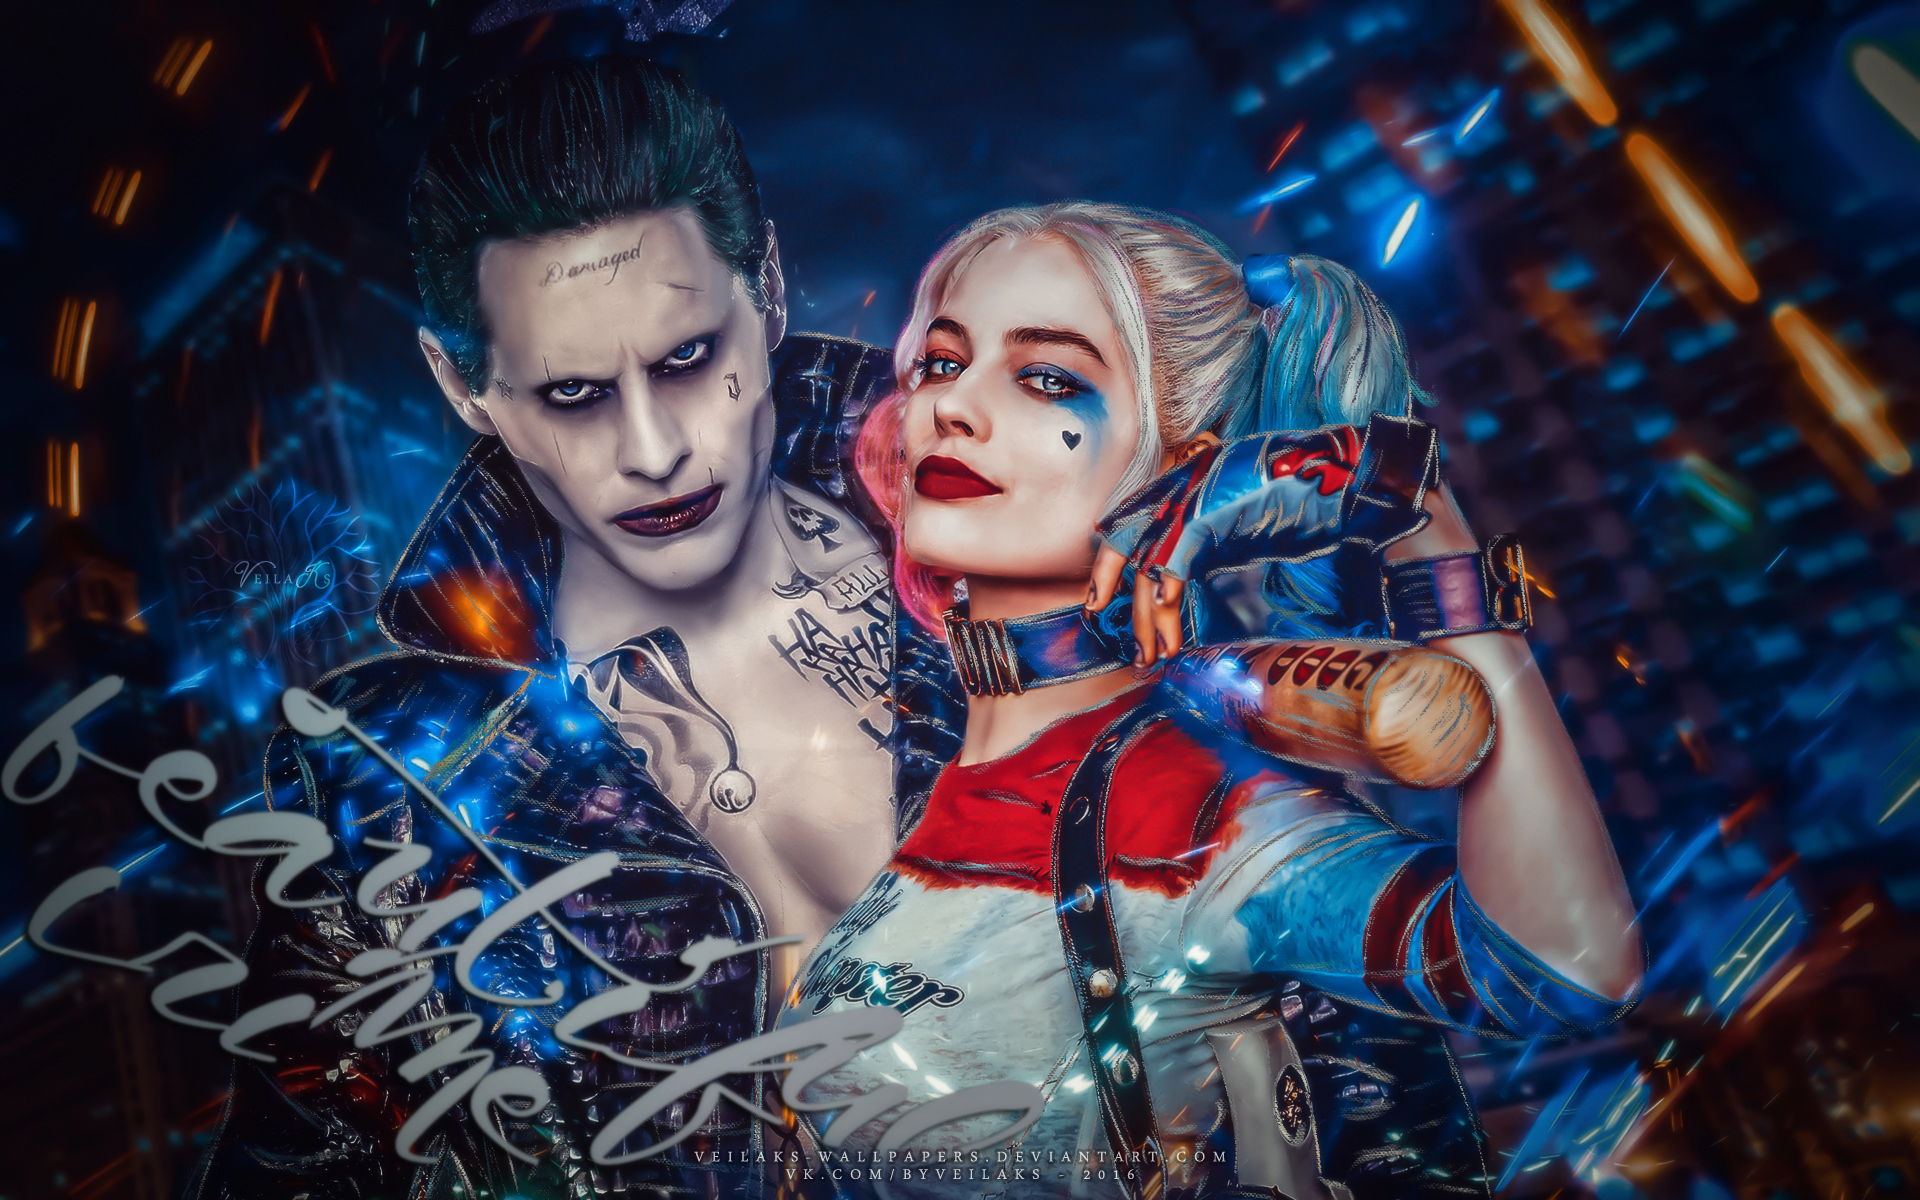 joker, movie, harley quinn, suicide squad, jared leto, margot robbie, two toned hair